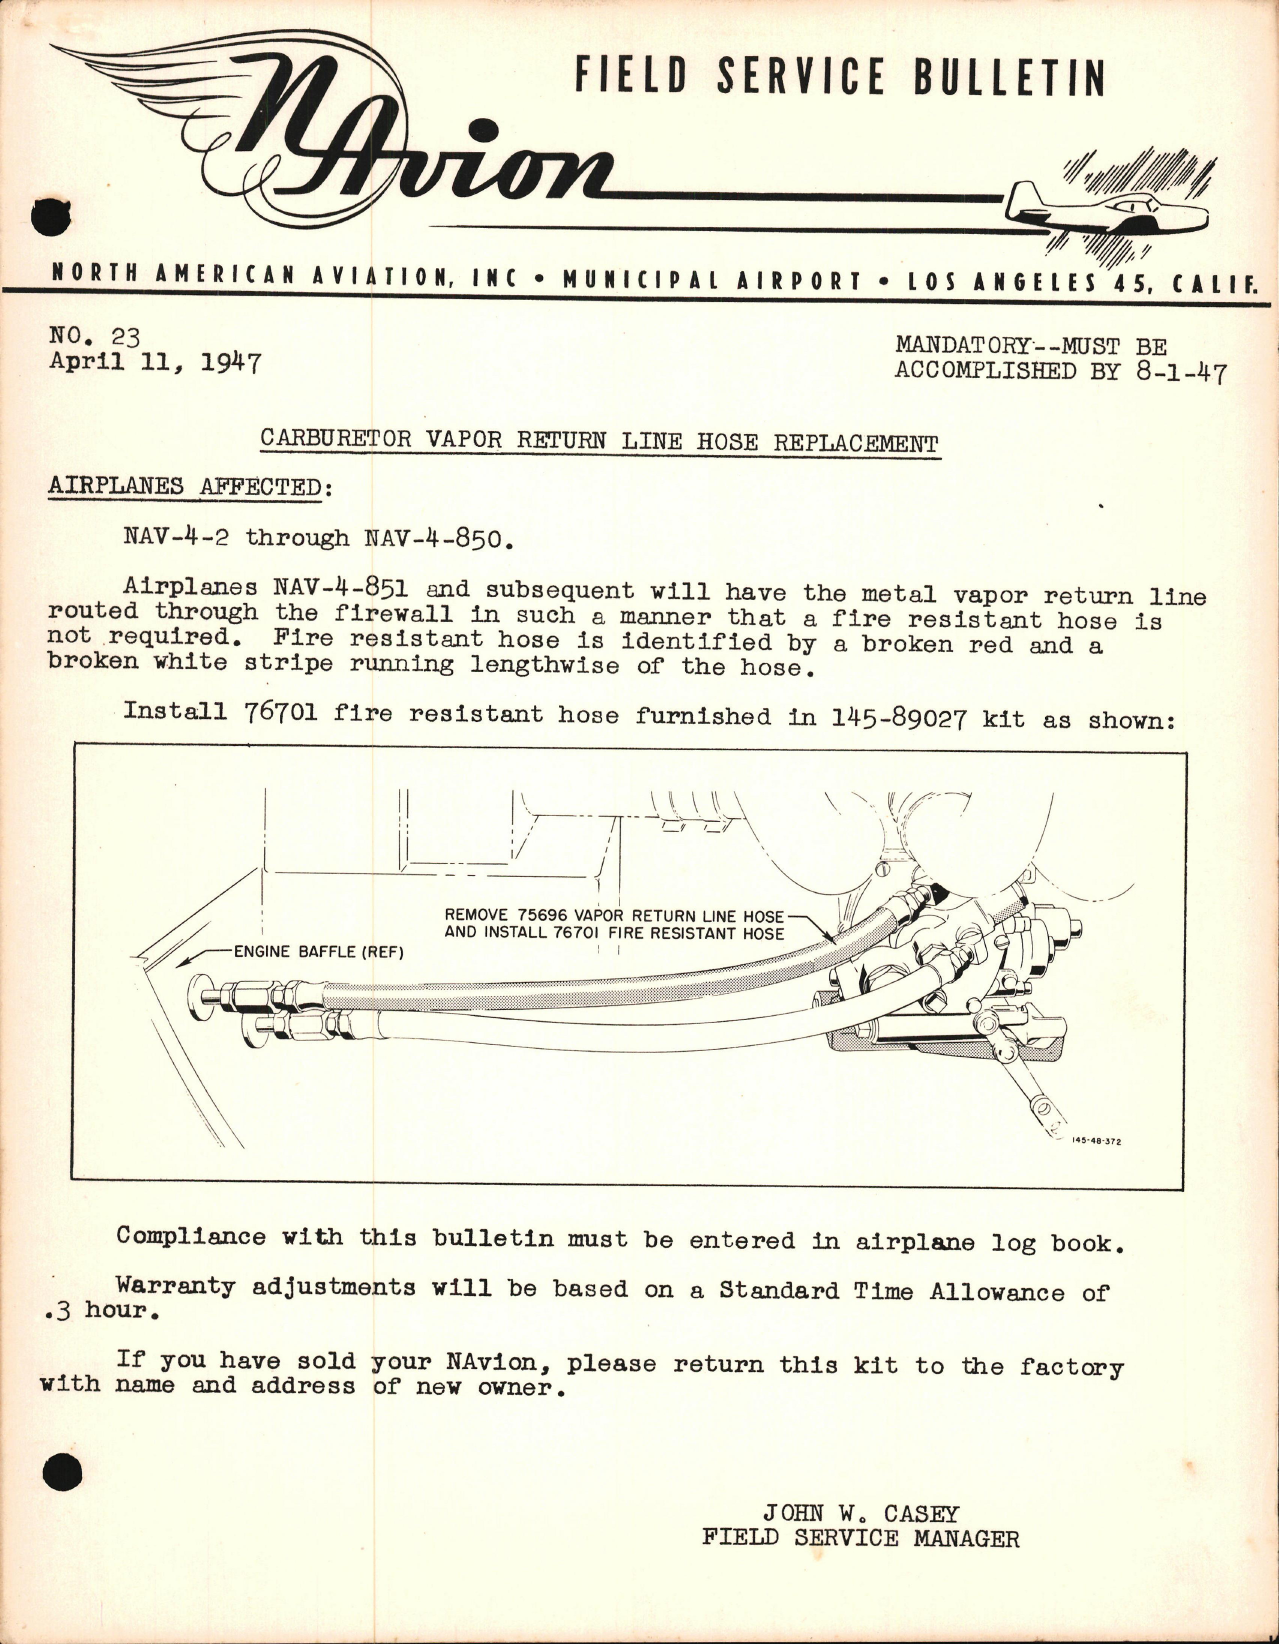 Sample page 1 from AirCorps Library document: Carburetor Vapor Return Line Hose Replacement